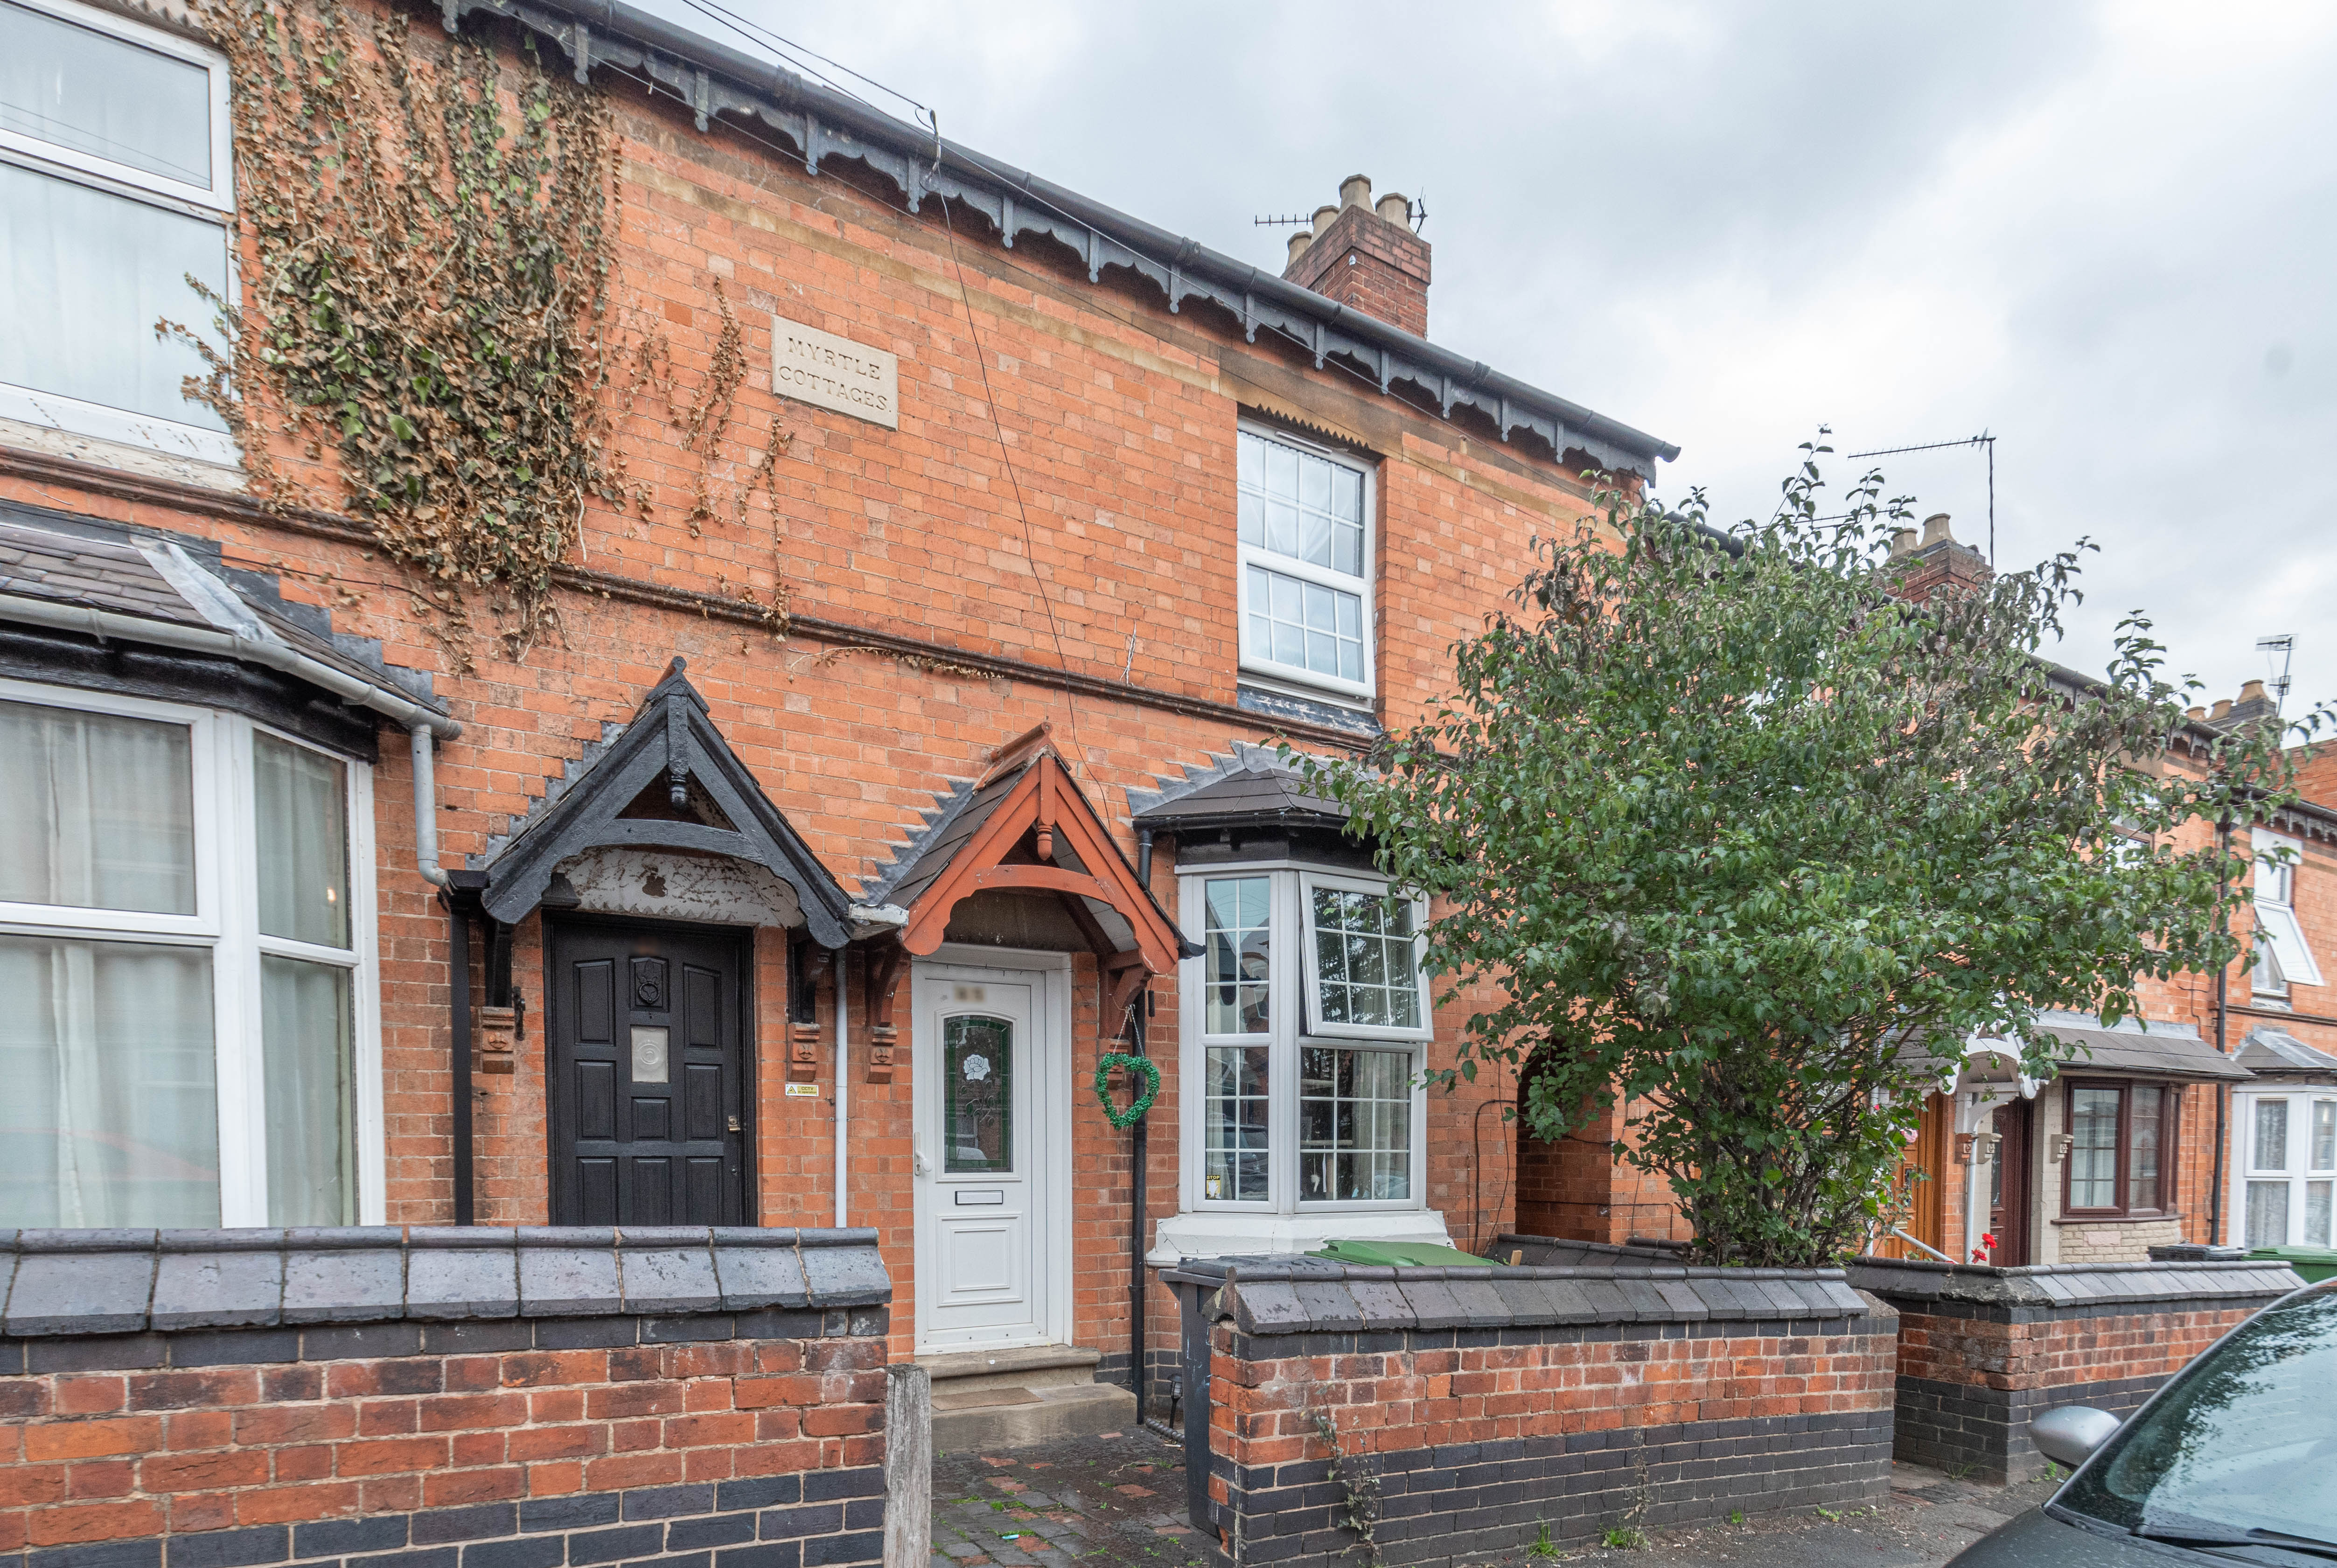 3 bed house for sale in Lodge Road, Redditch - Property Image 1